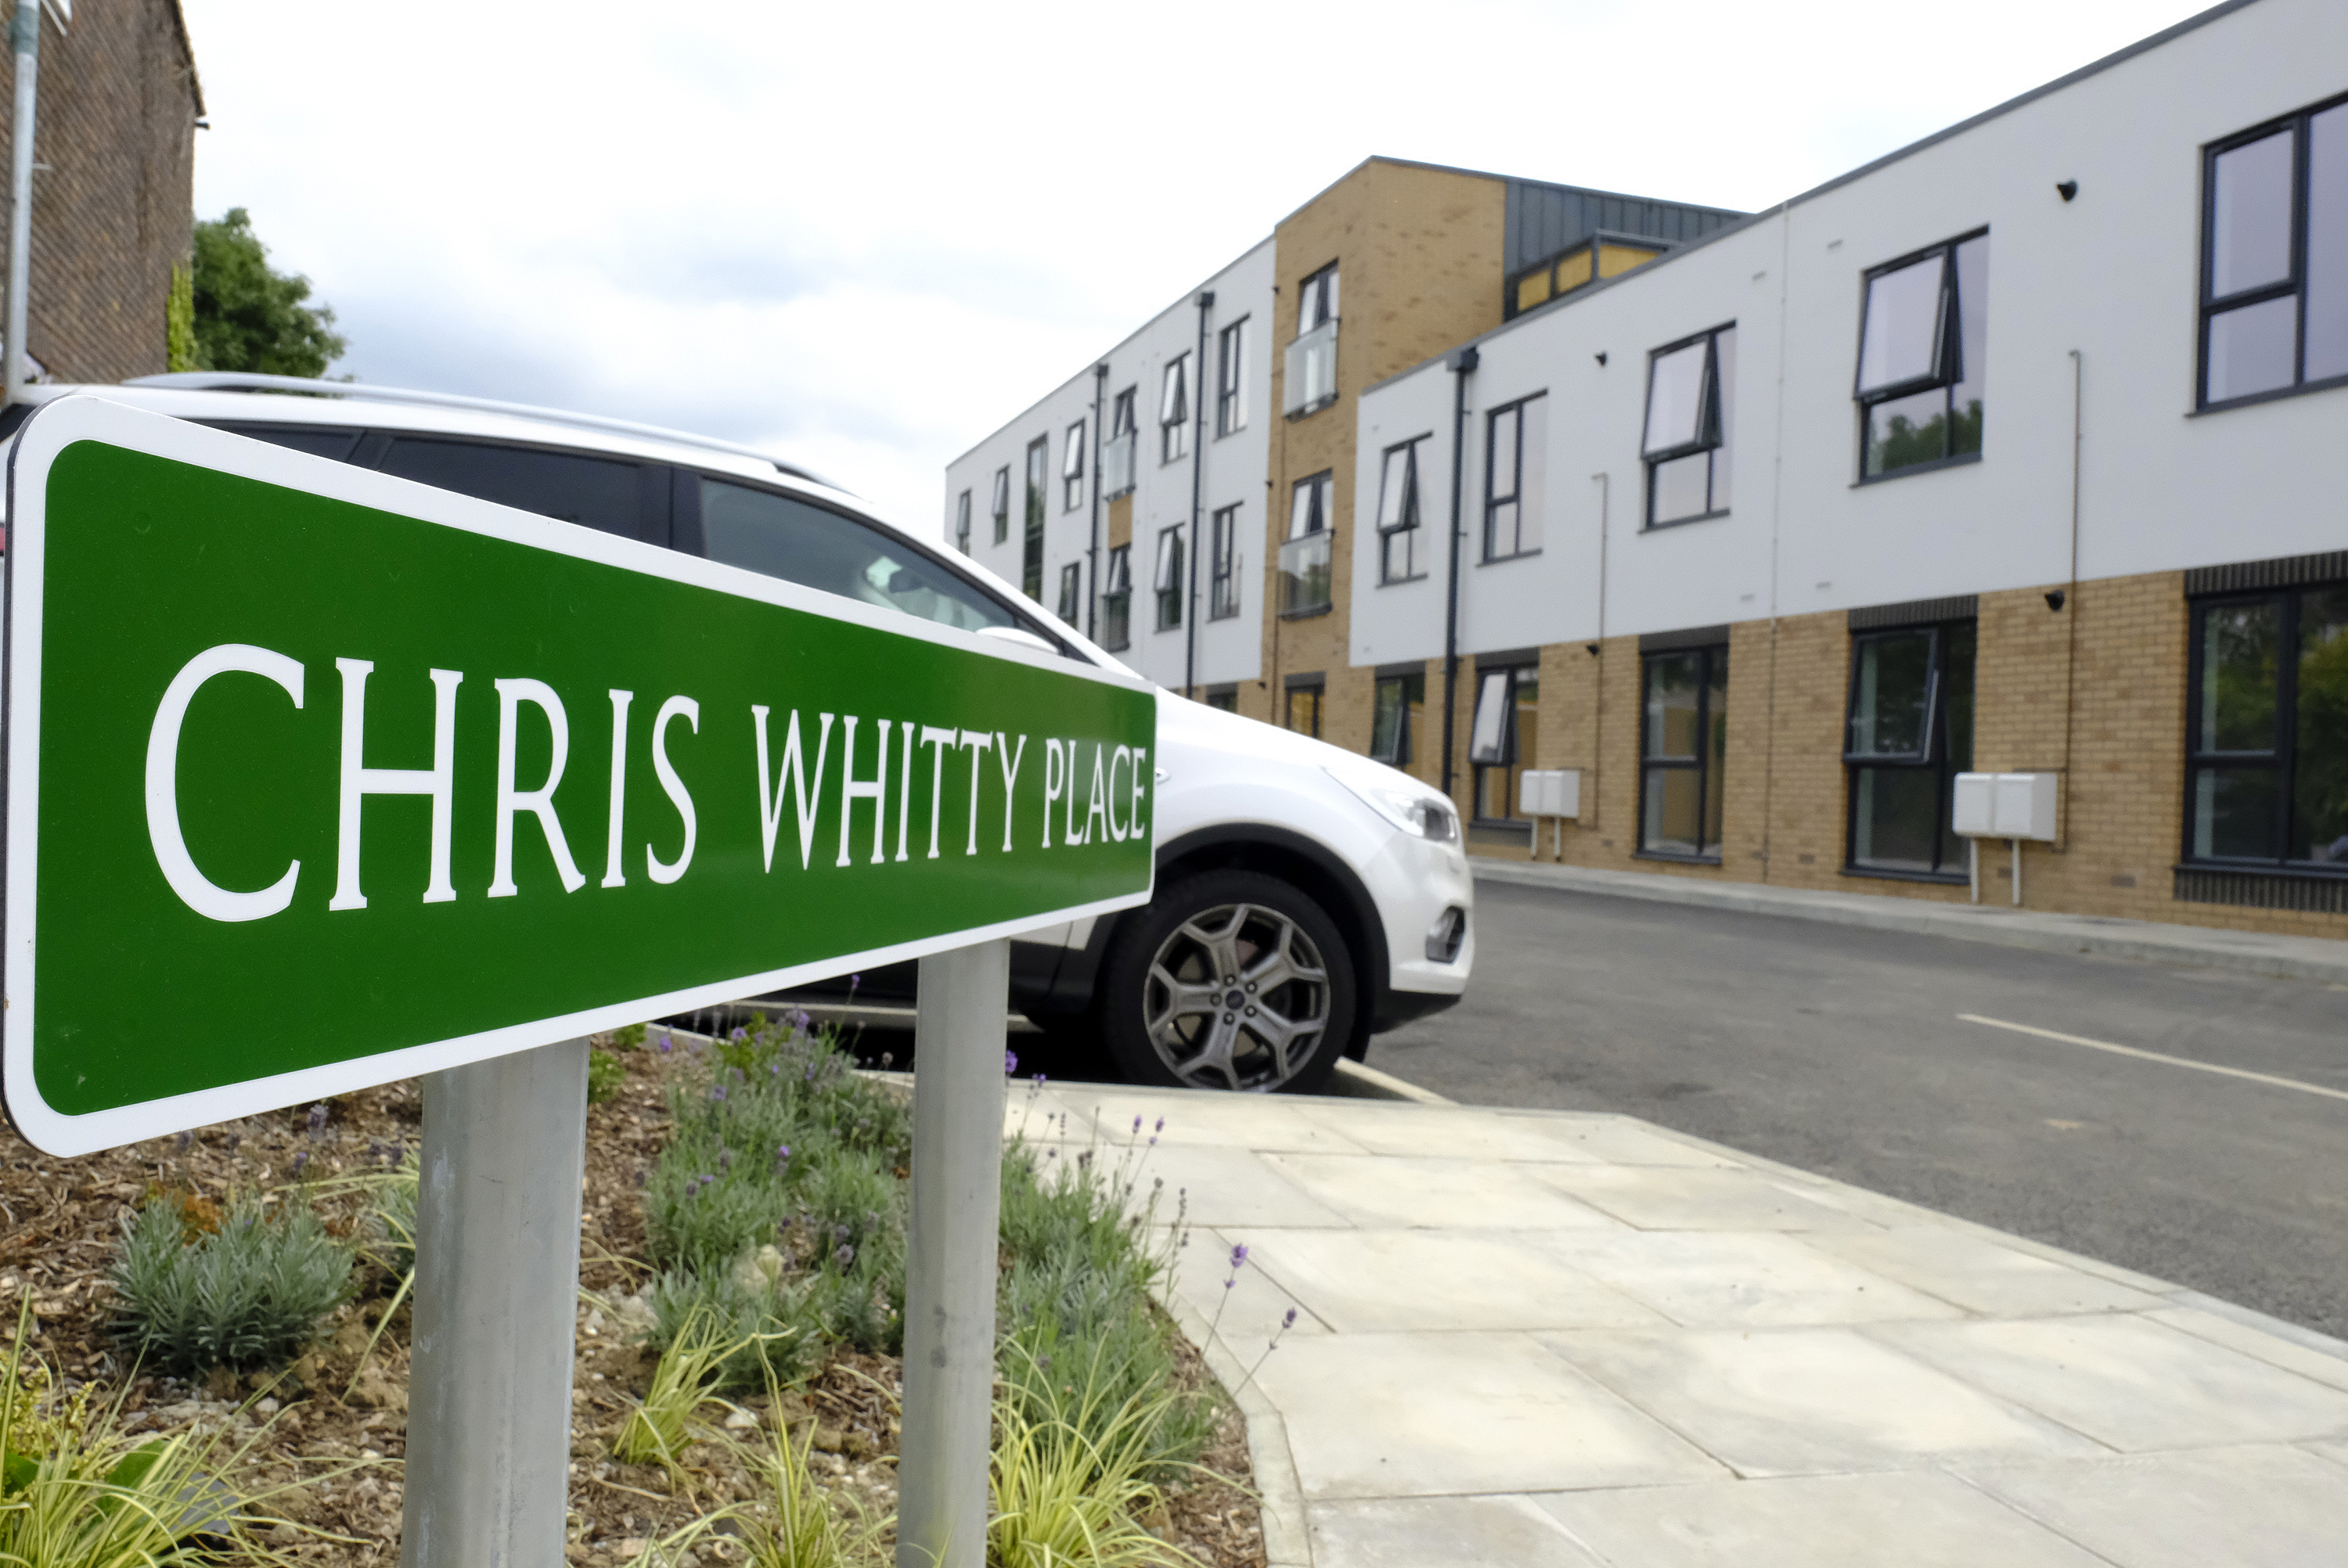 Chris Whitty Place road sign in front of the new building.